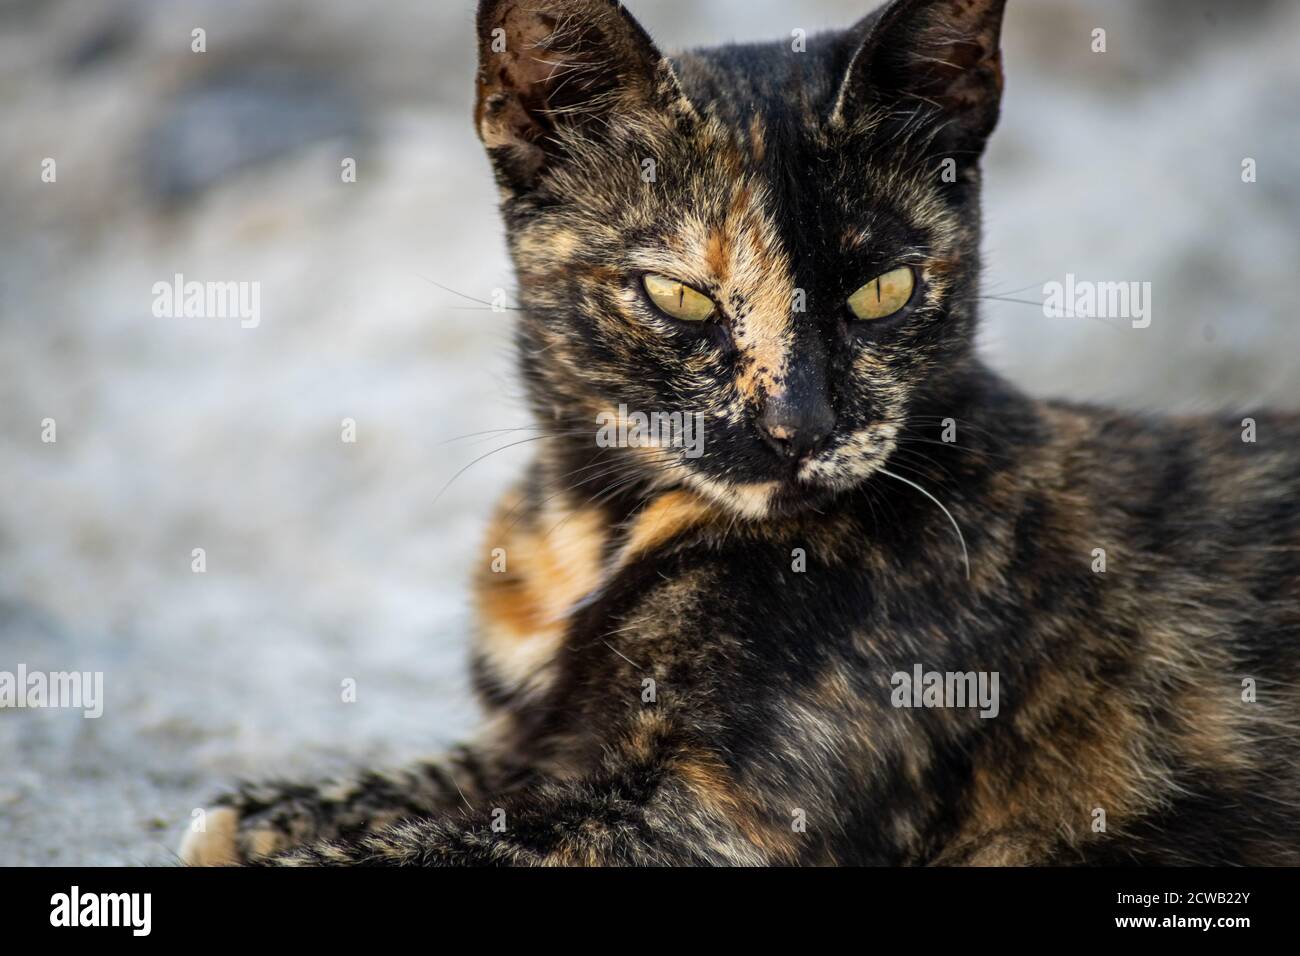 Closeup of a gold and black cat with yellow eyes lying on a stone floor Stock Photo